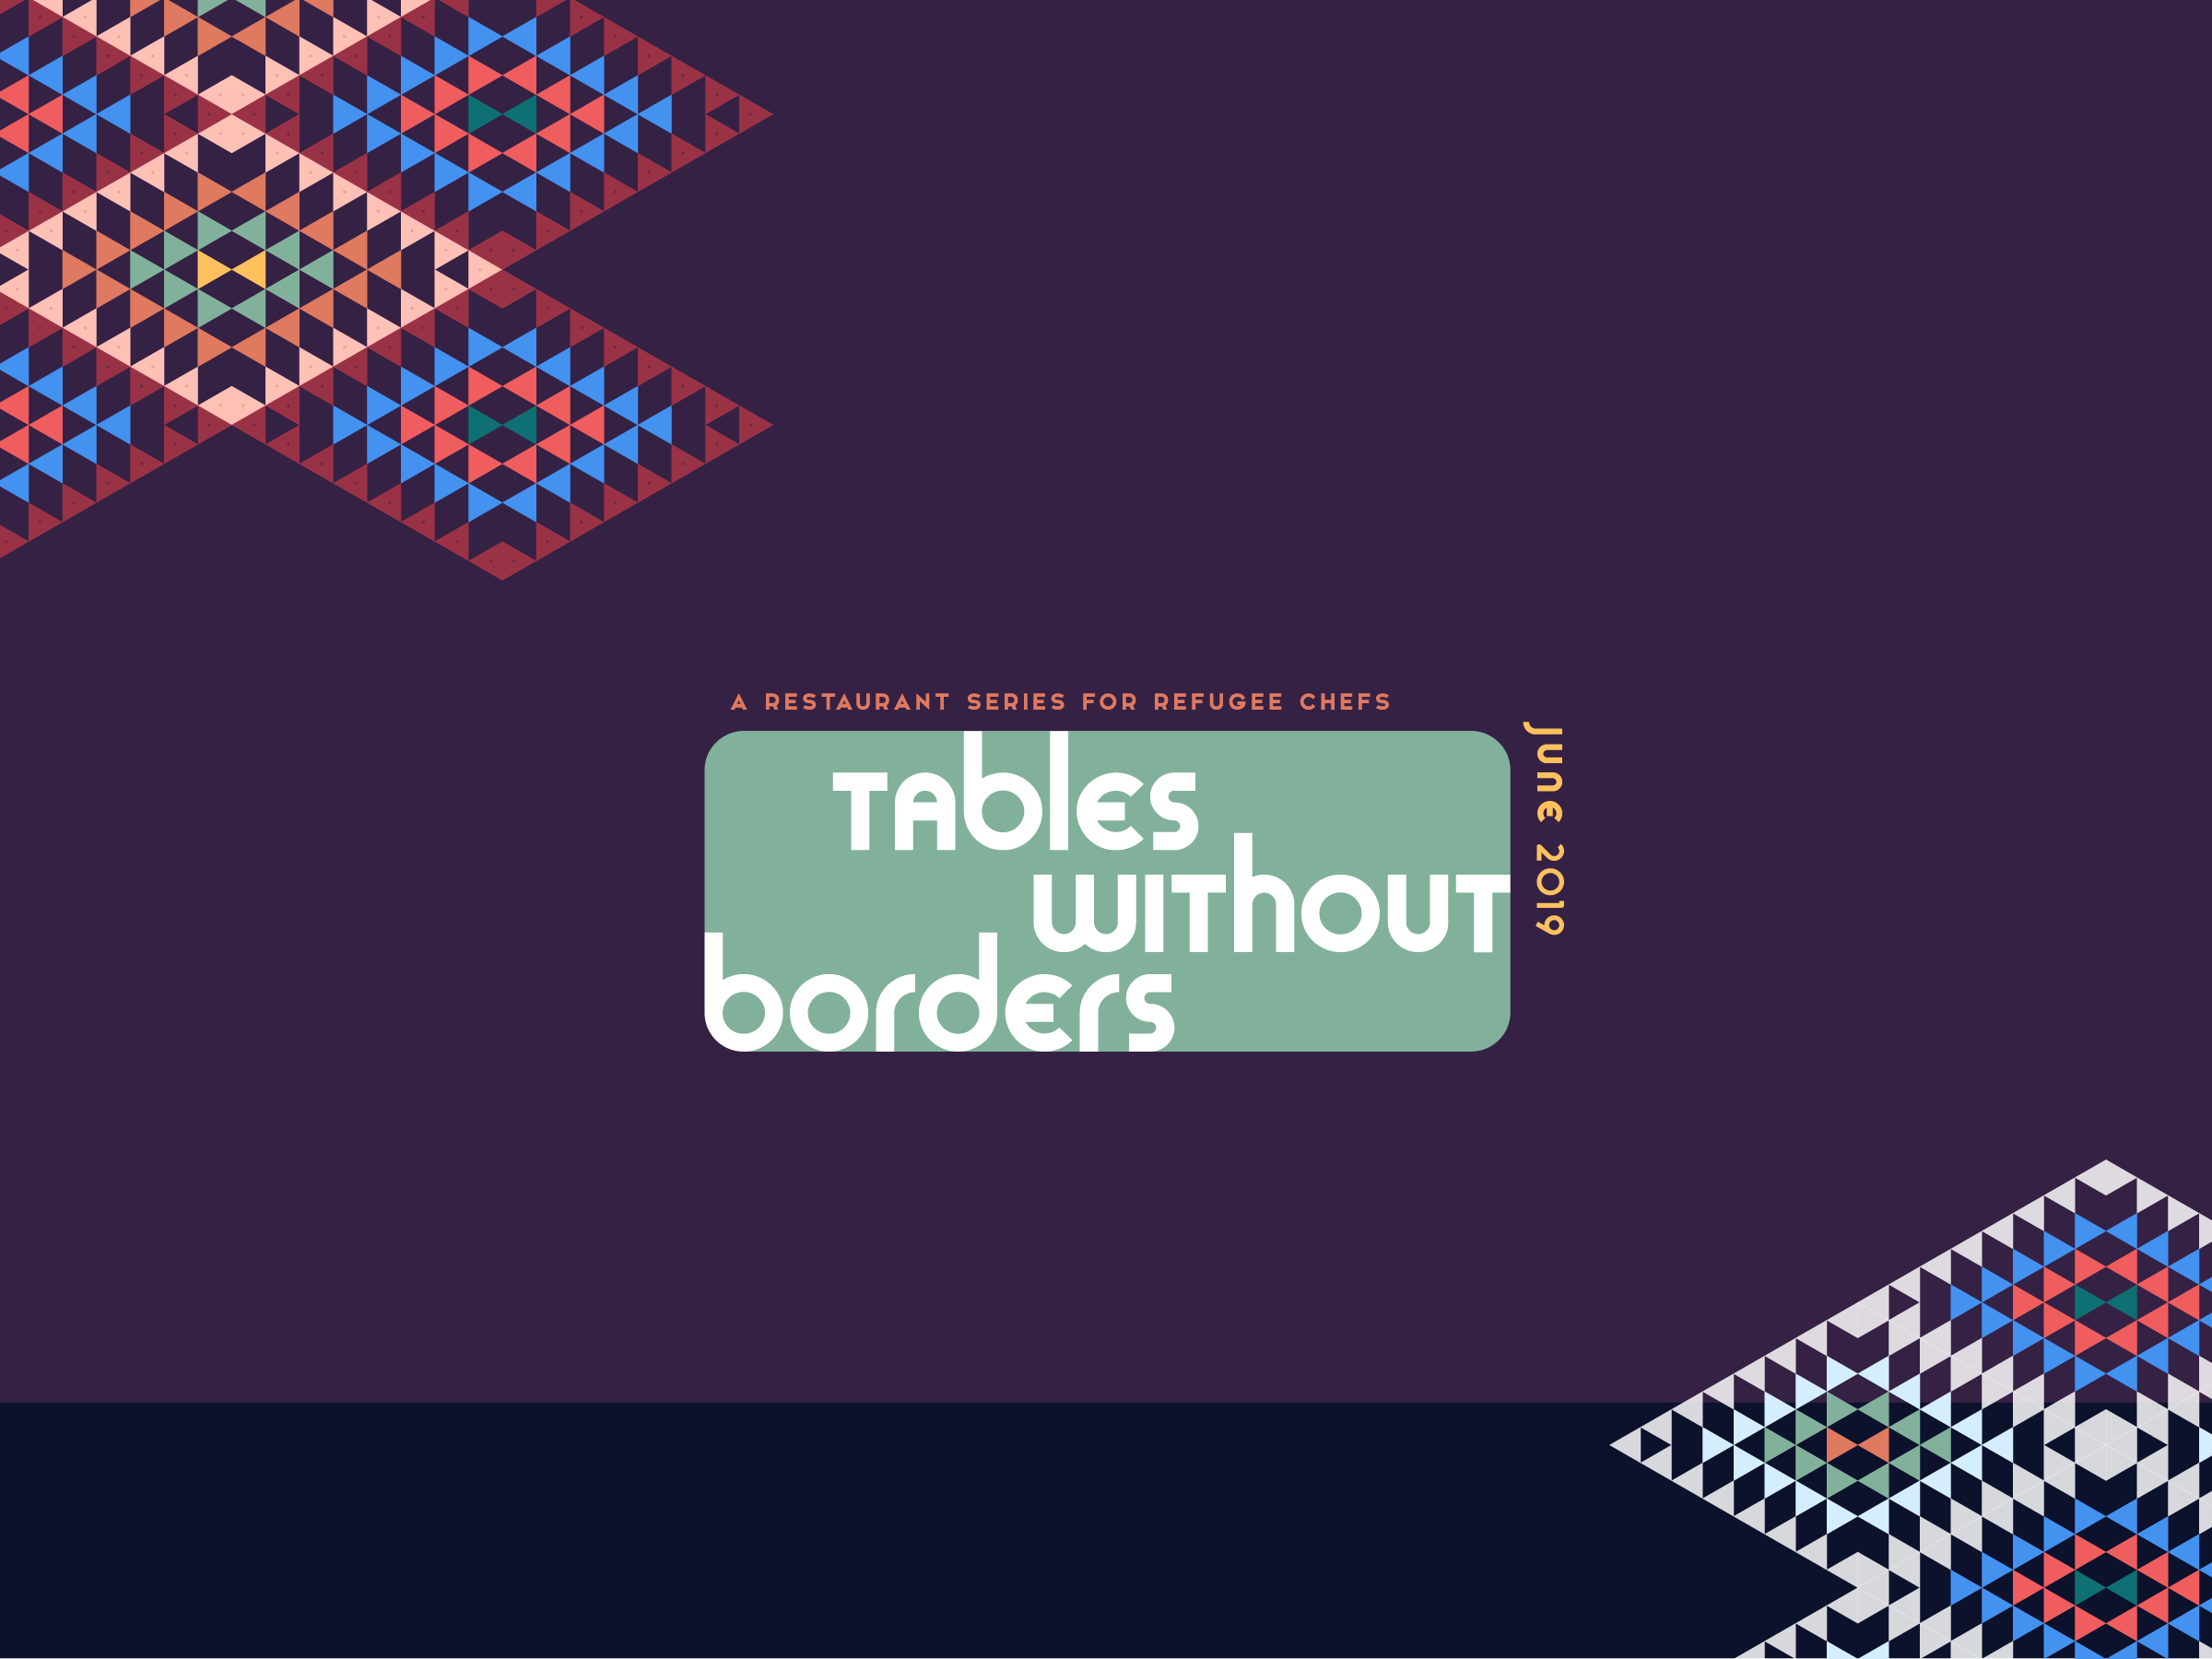 Tables Without Borders